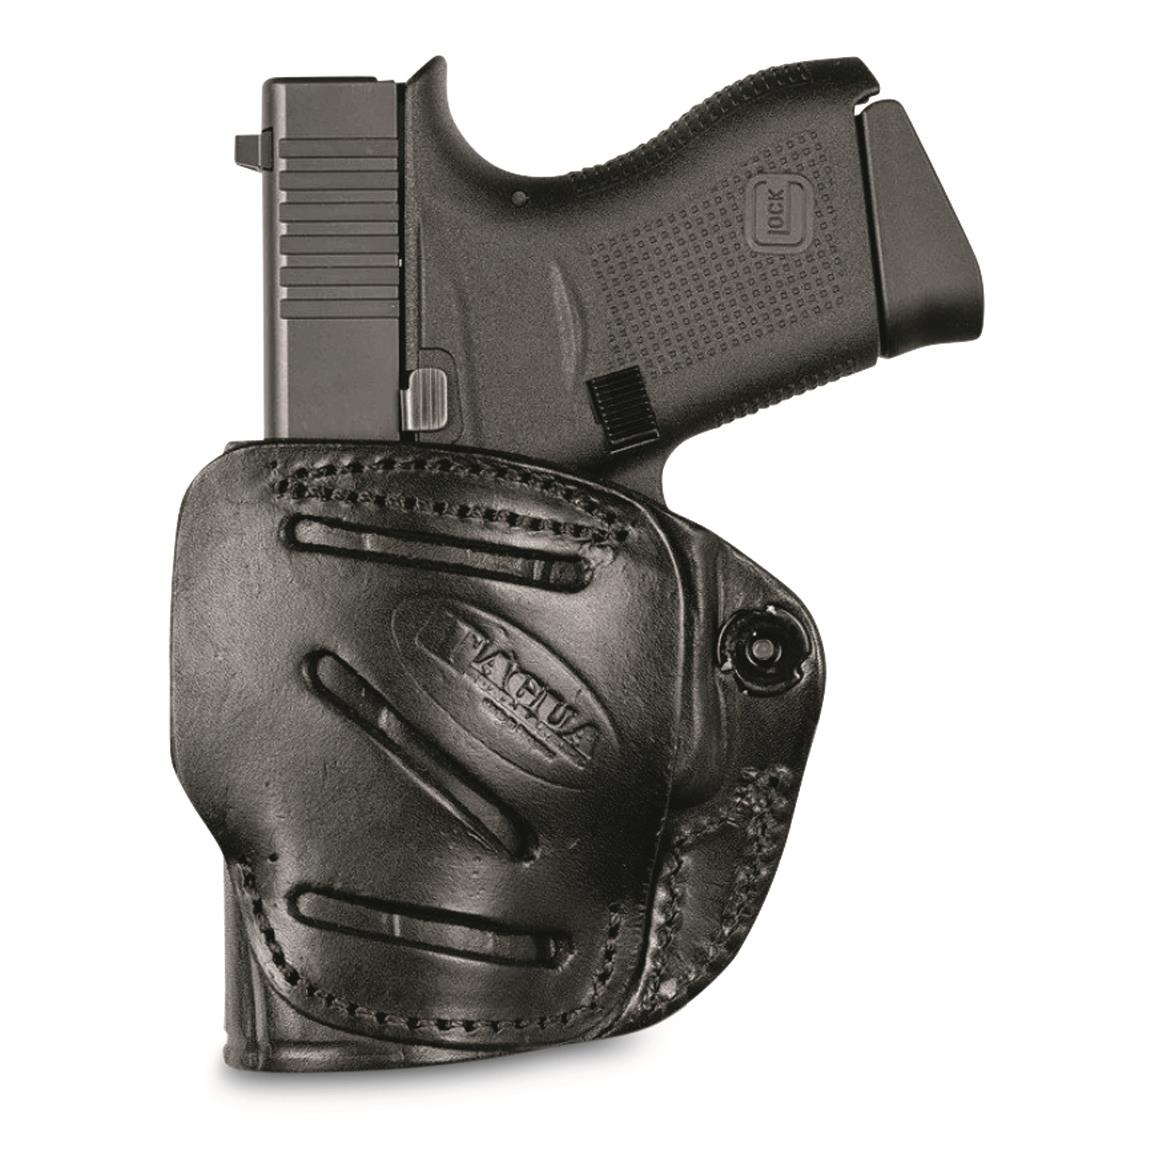 Tagua TX-4 Victory Black Leather Holster  Smith & Wesson M&P Shield/M2.0 3" Barrel